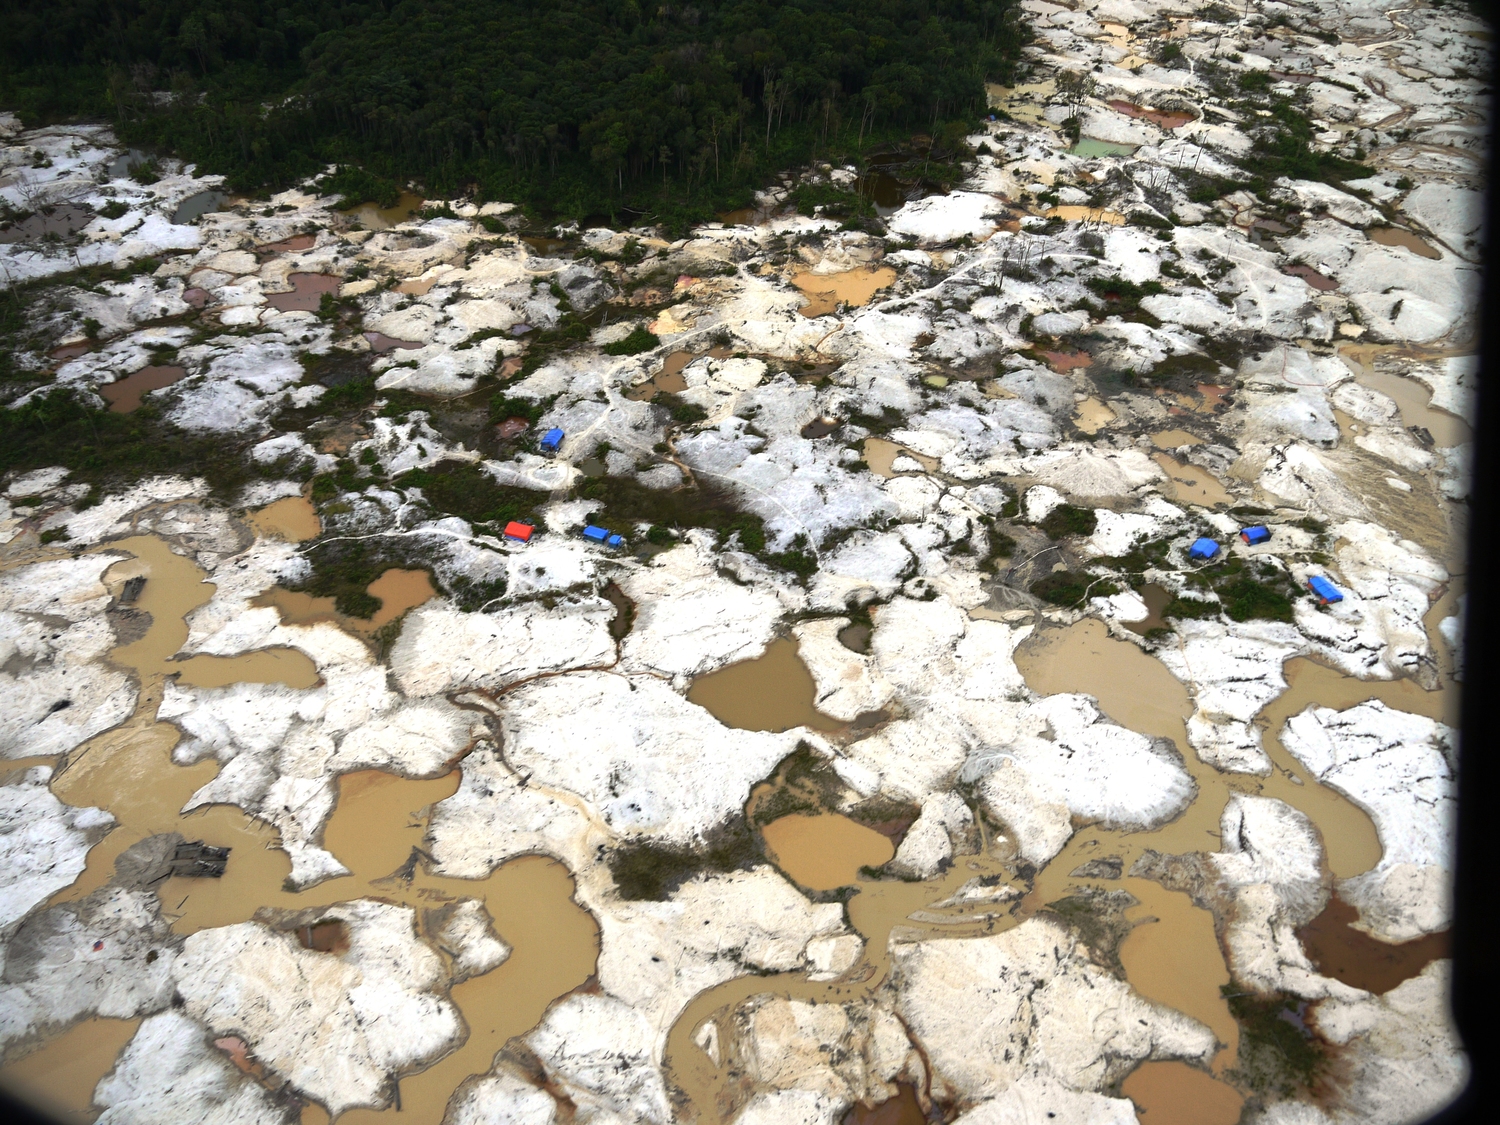 A moonscape of illegal gold mining in Sumatra, Indonesia (photo by William Laurance).